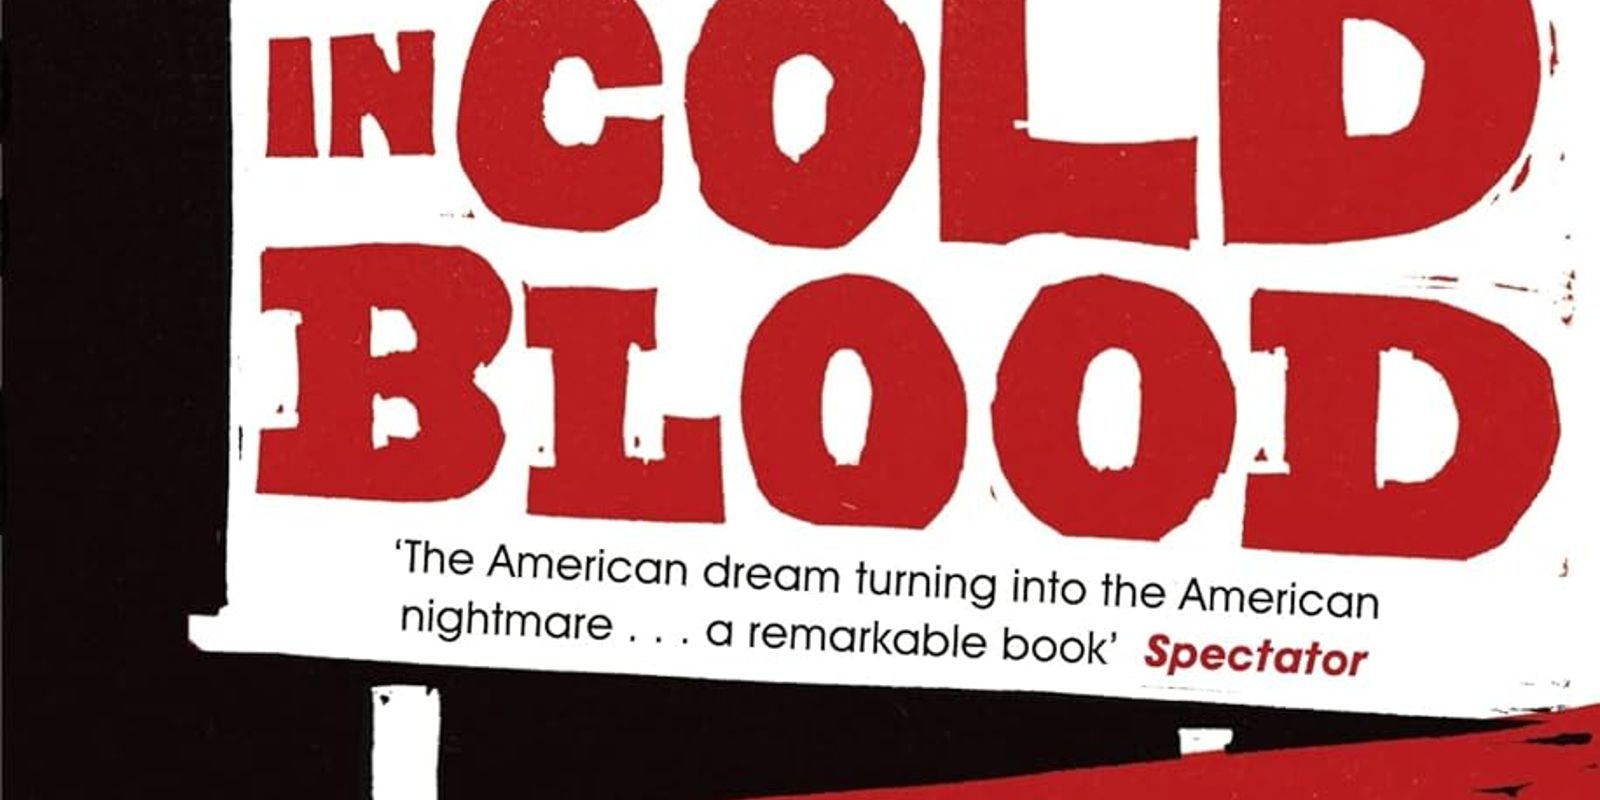 This image shows the cover of In Cold Blood by Truman Capote